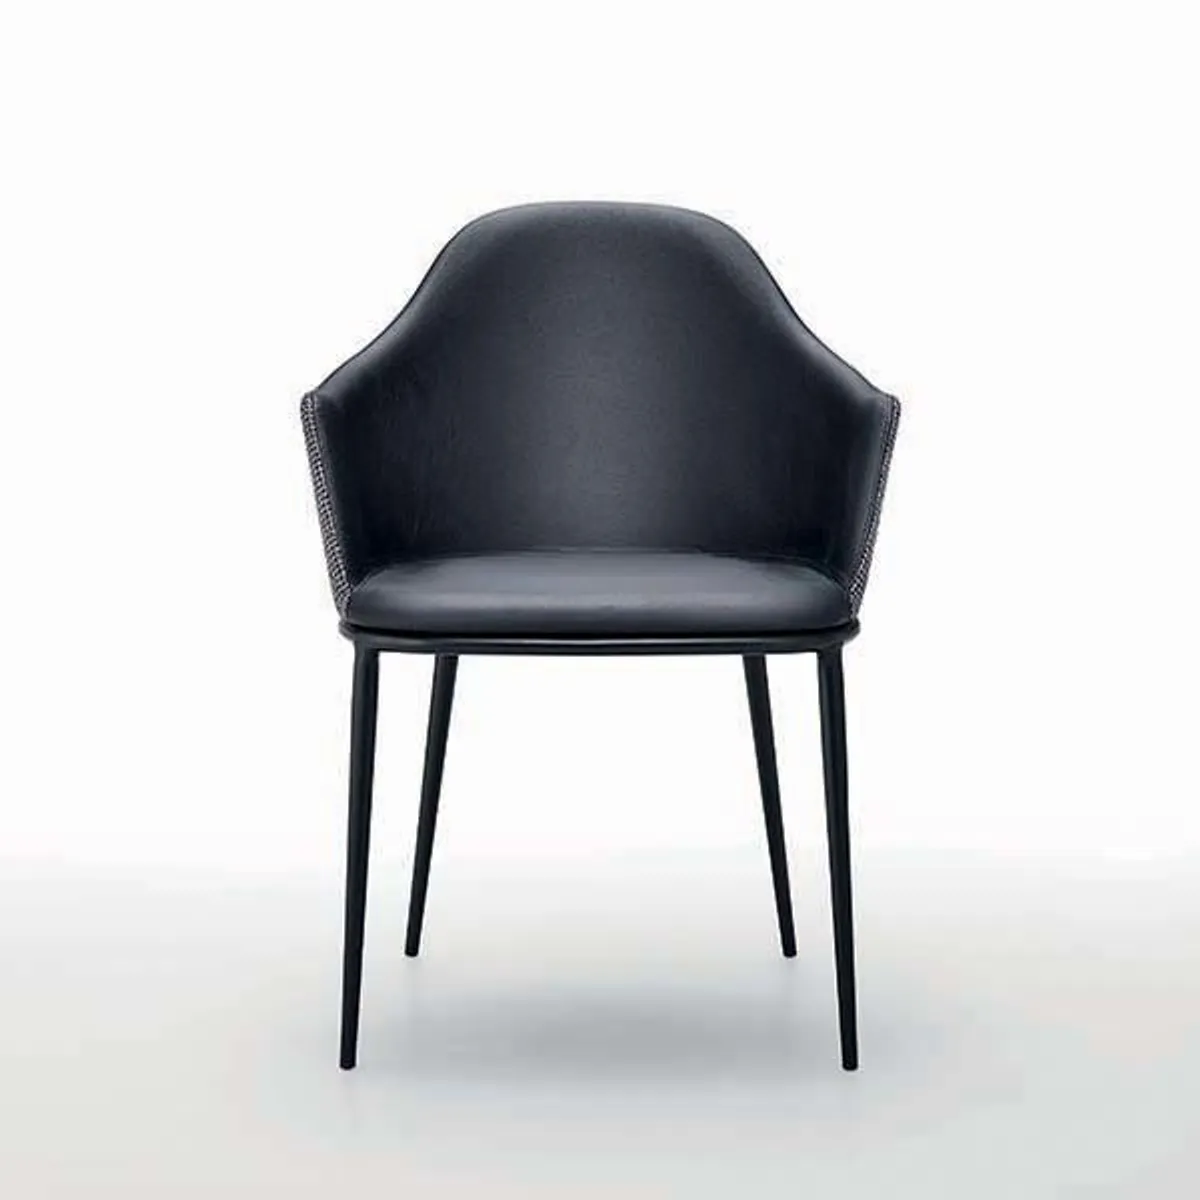 Lea Armchair Metal Frame Inside Out Contracts